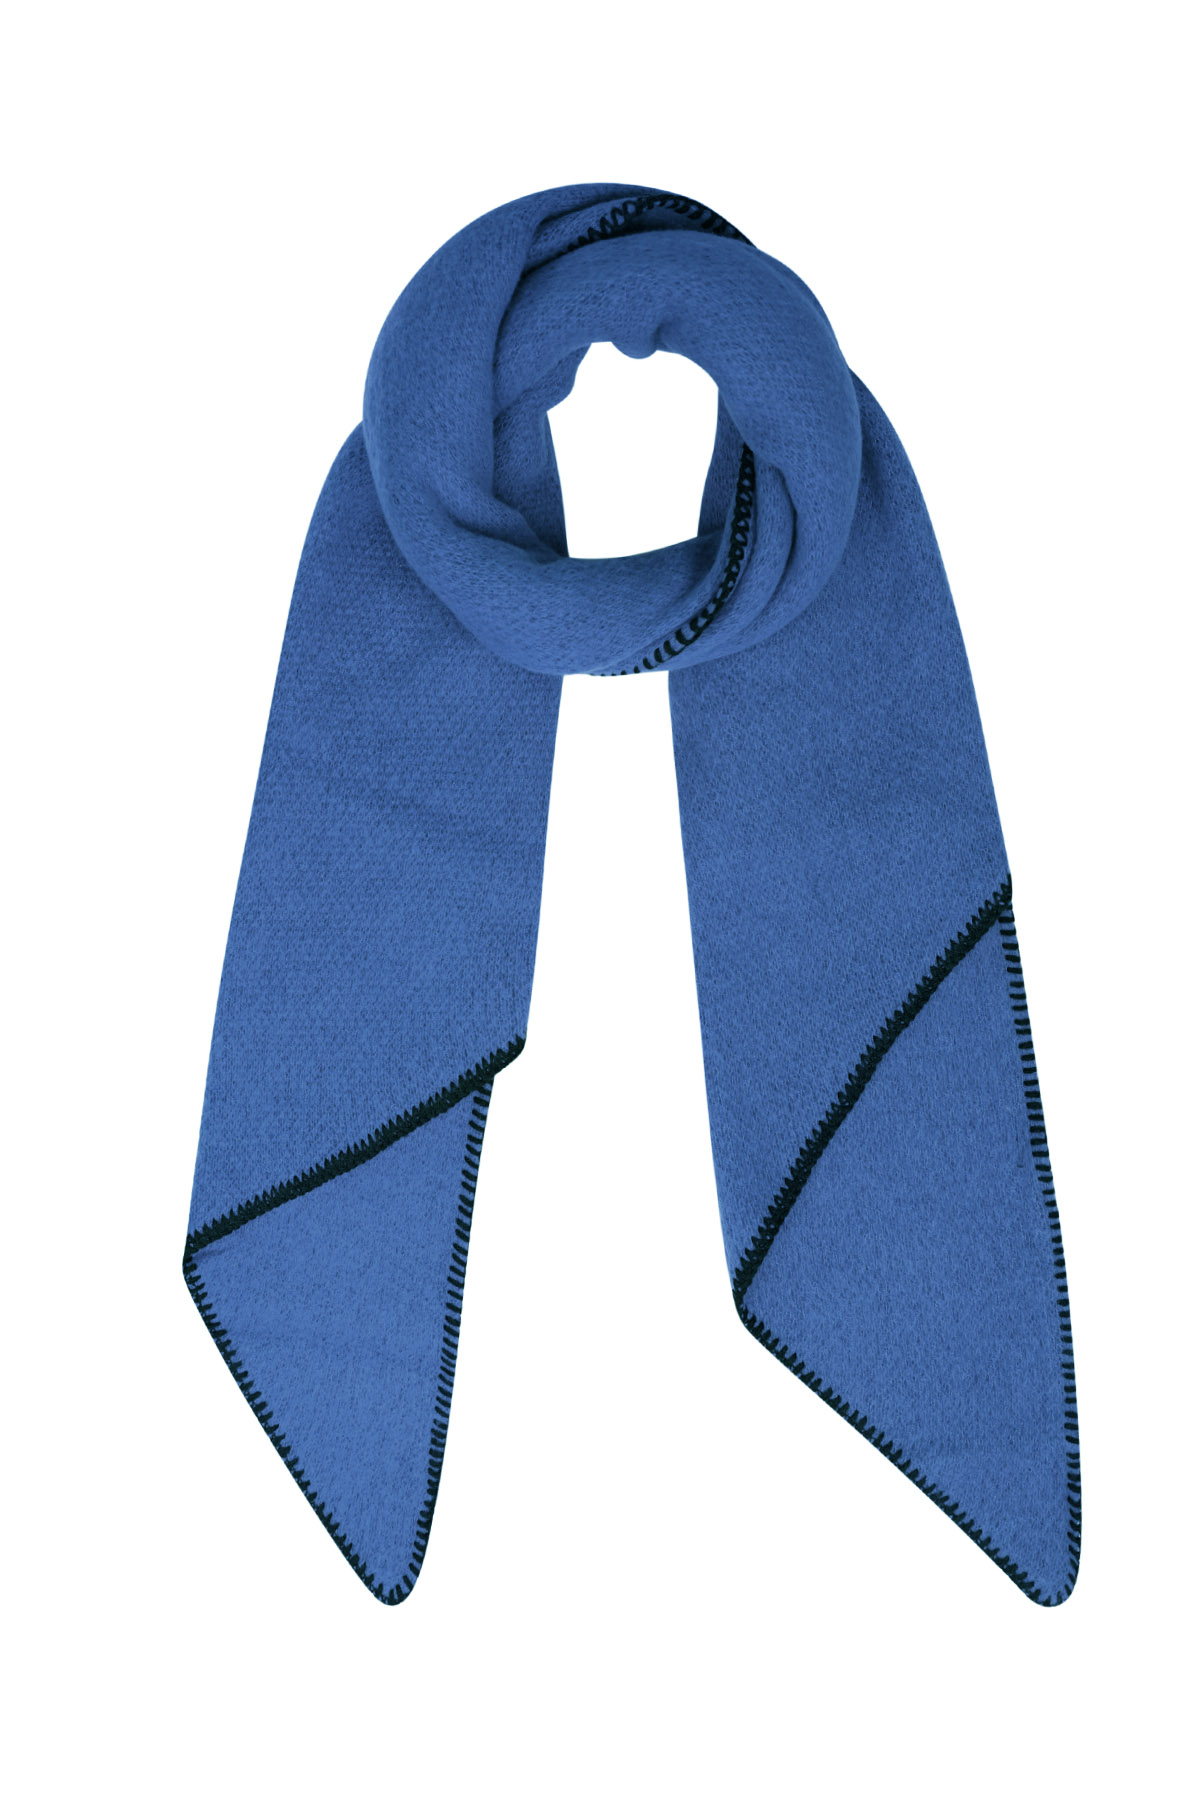 Winter scarf single-colored with black stitching - cobalt